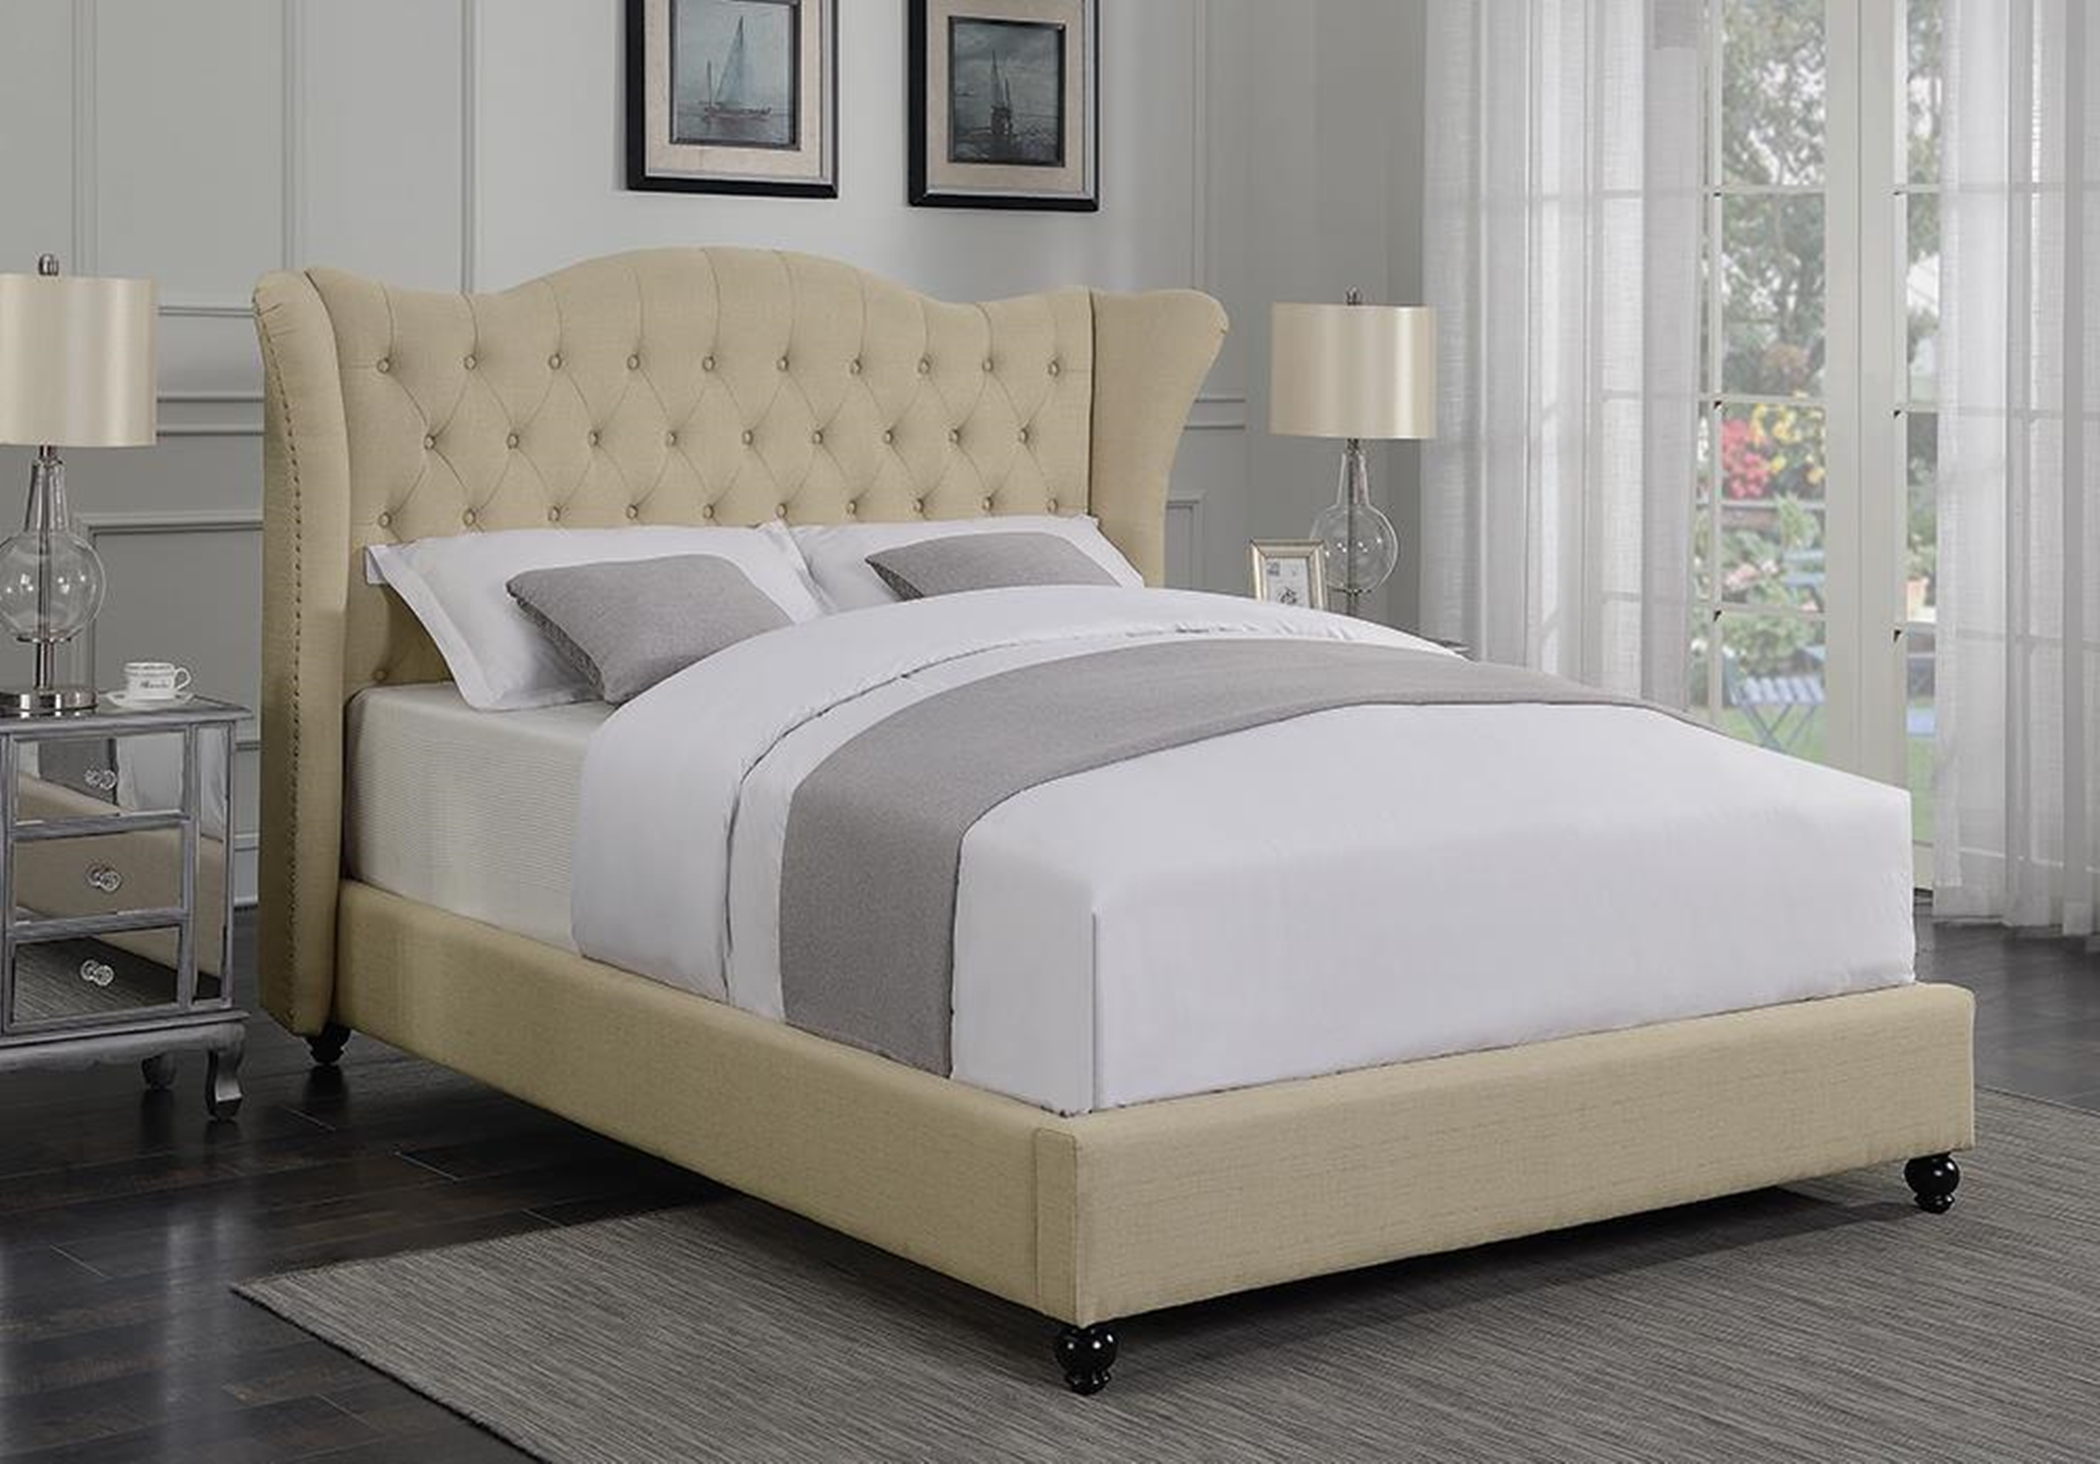 Coronado Beige Upholstered King Bed - Click Image to Close